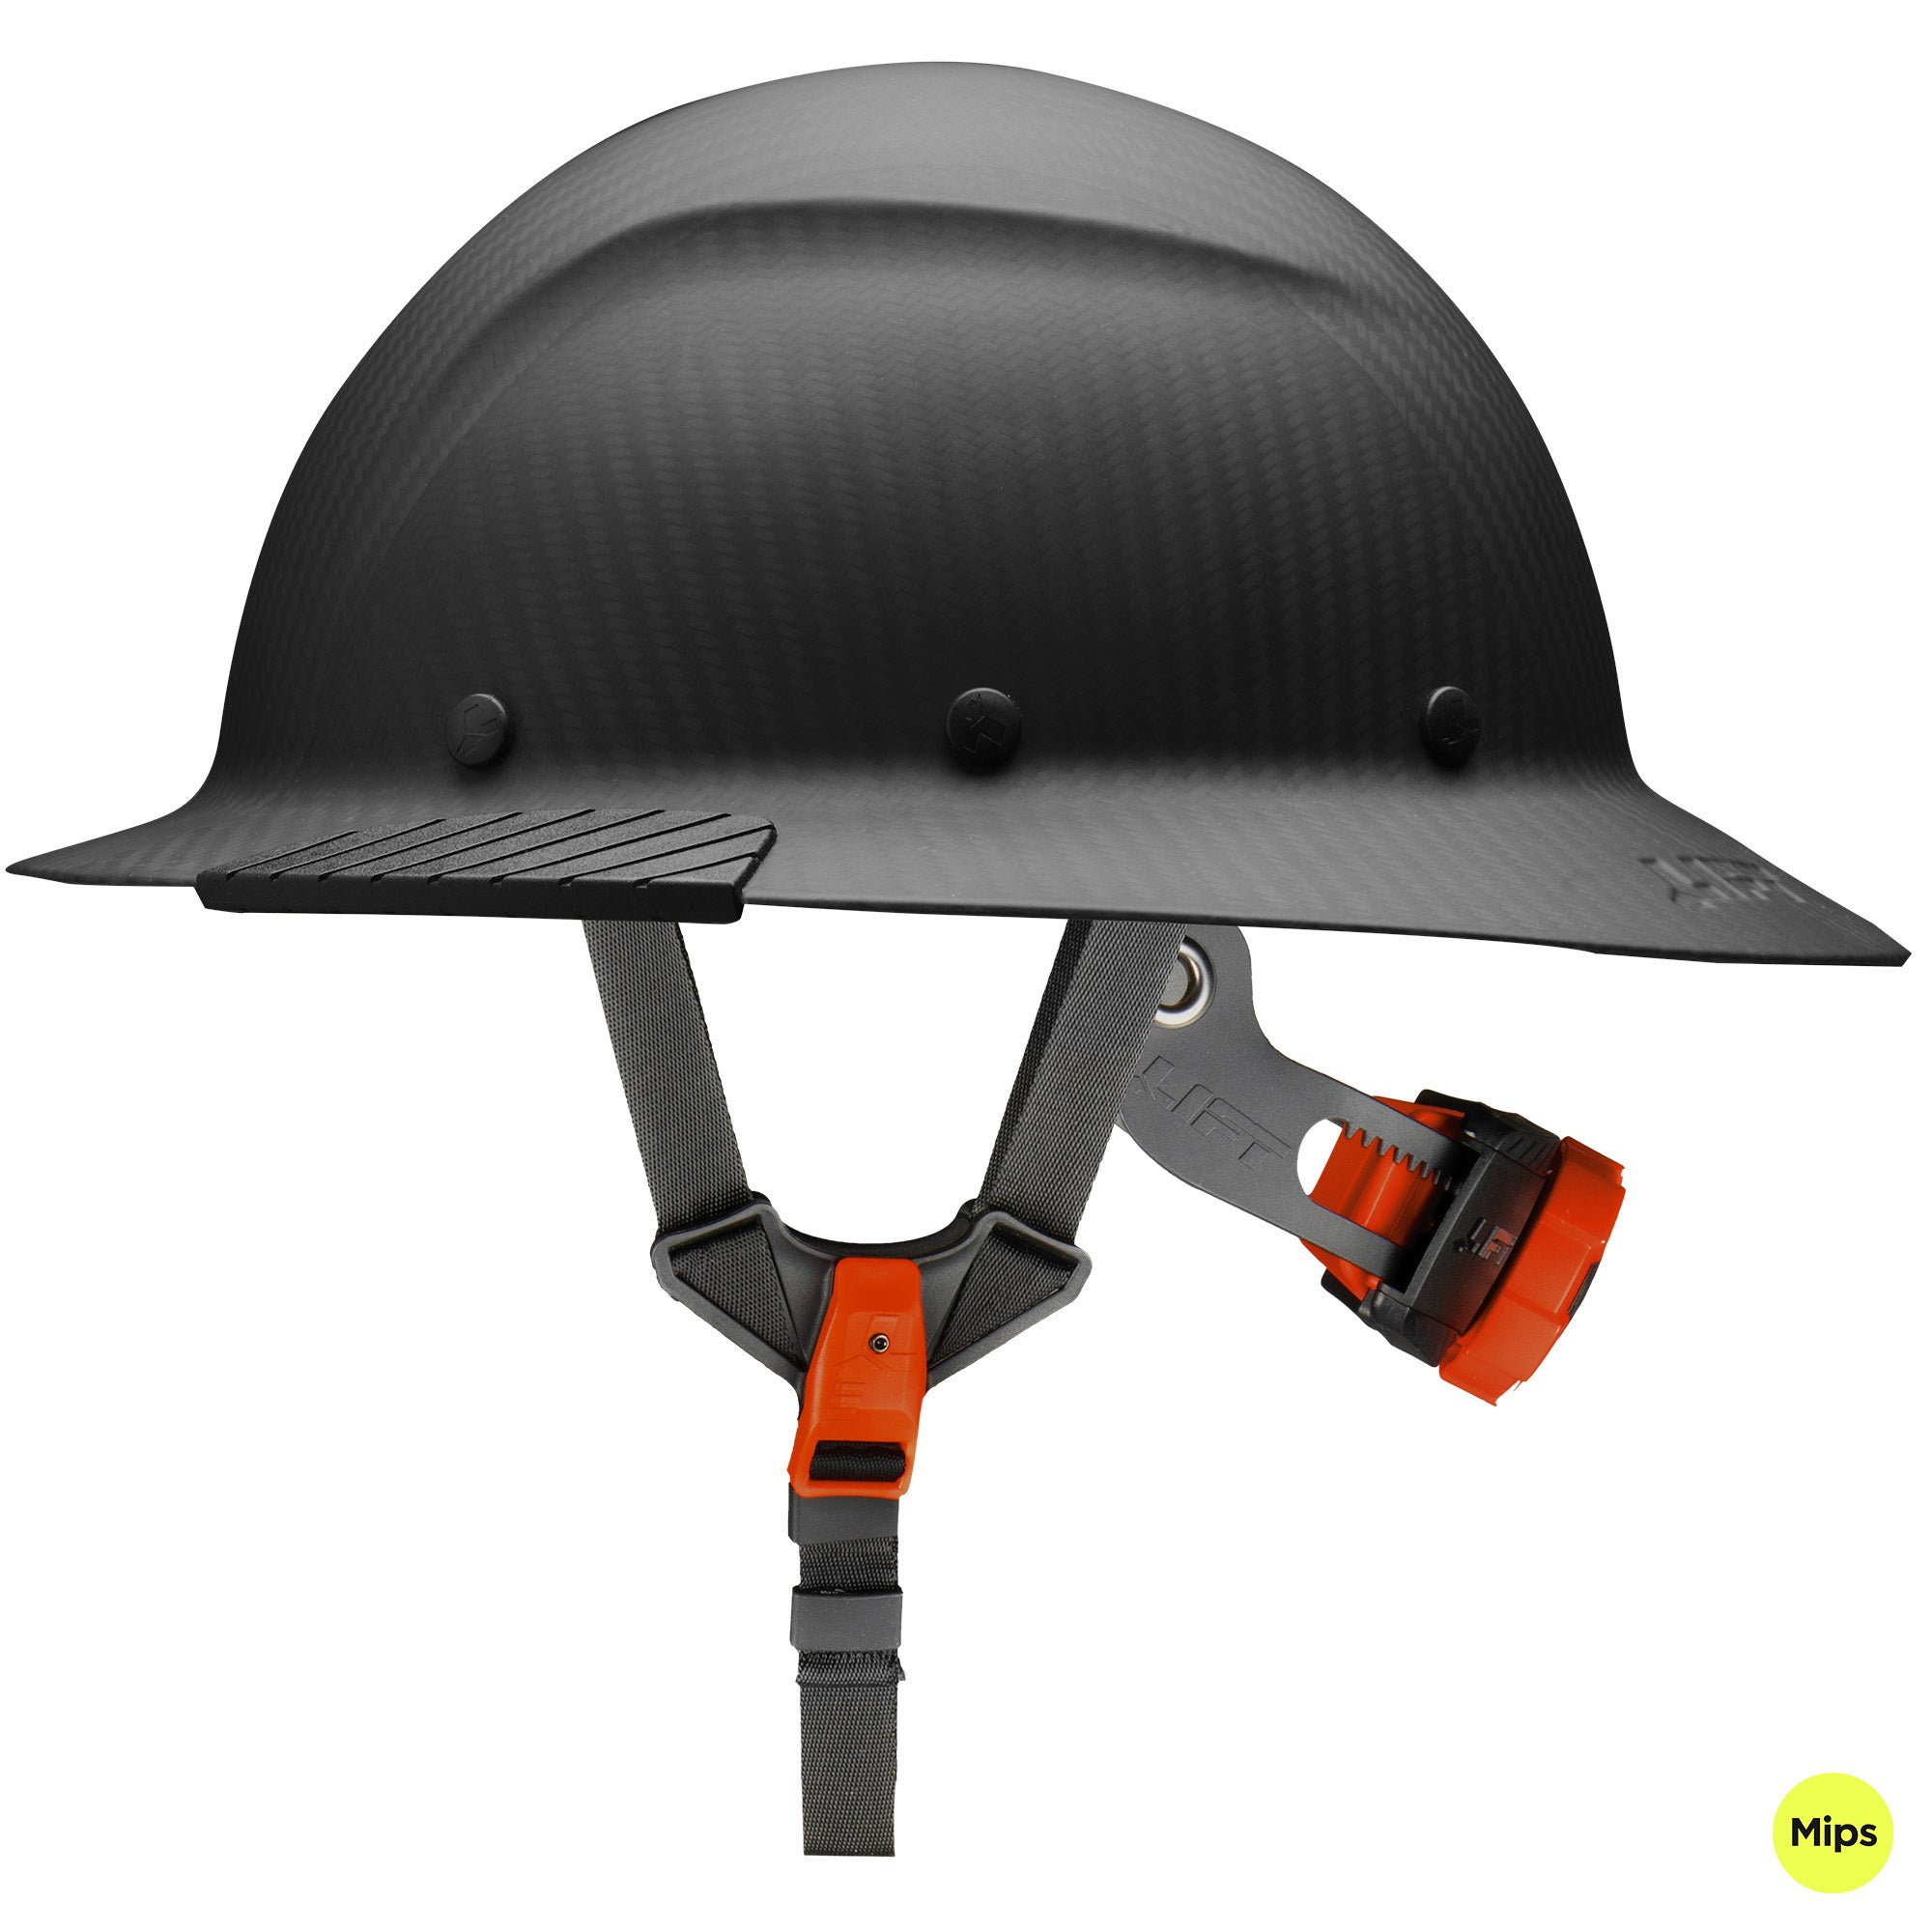 DAX Full Brim Hard Hat with Mips - Carbon Matte - LIFT Safety